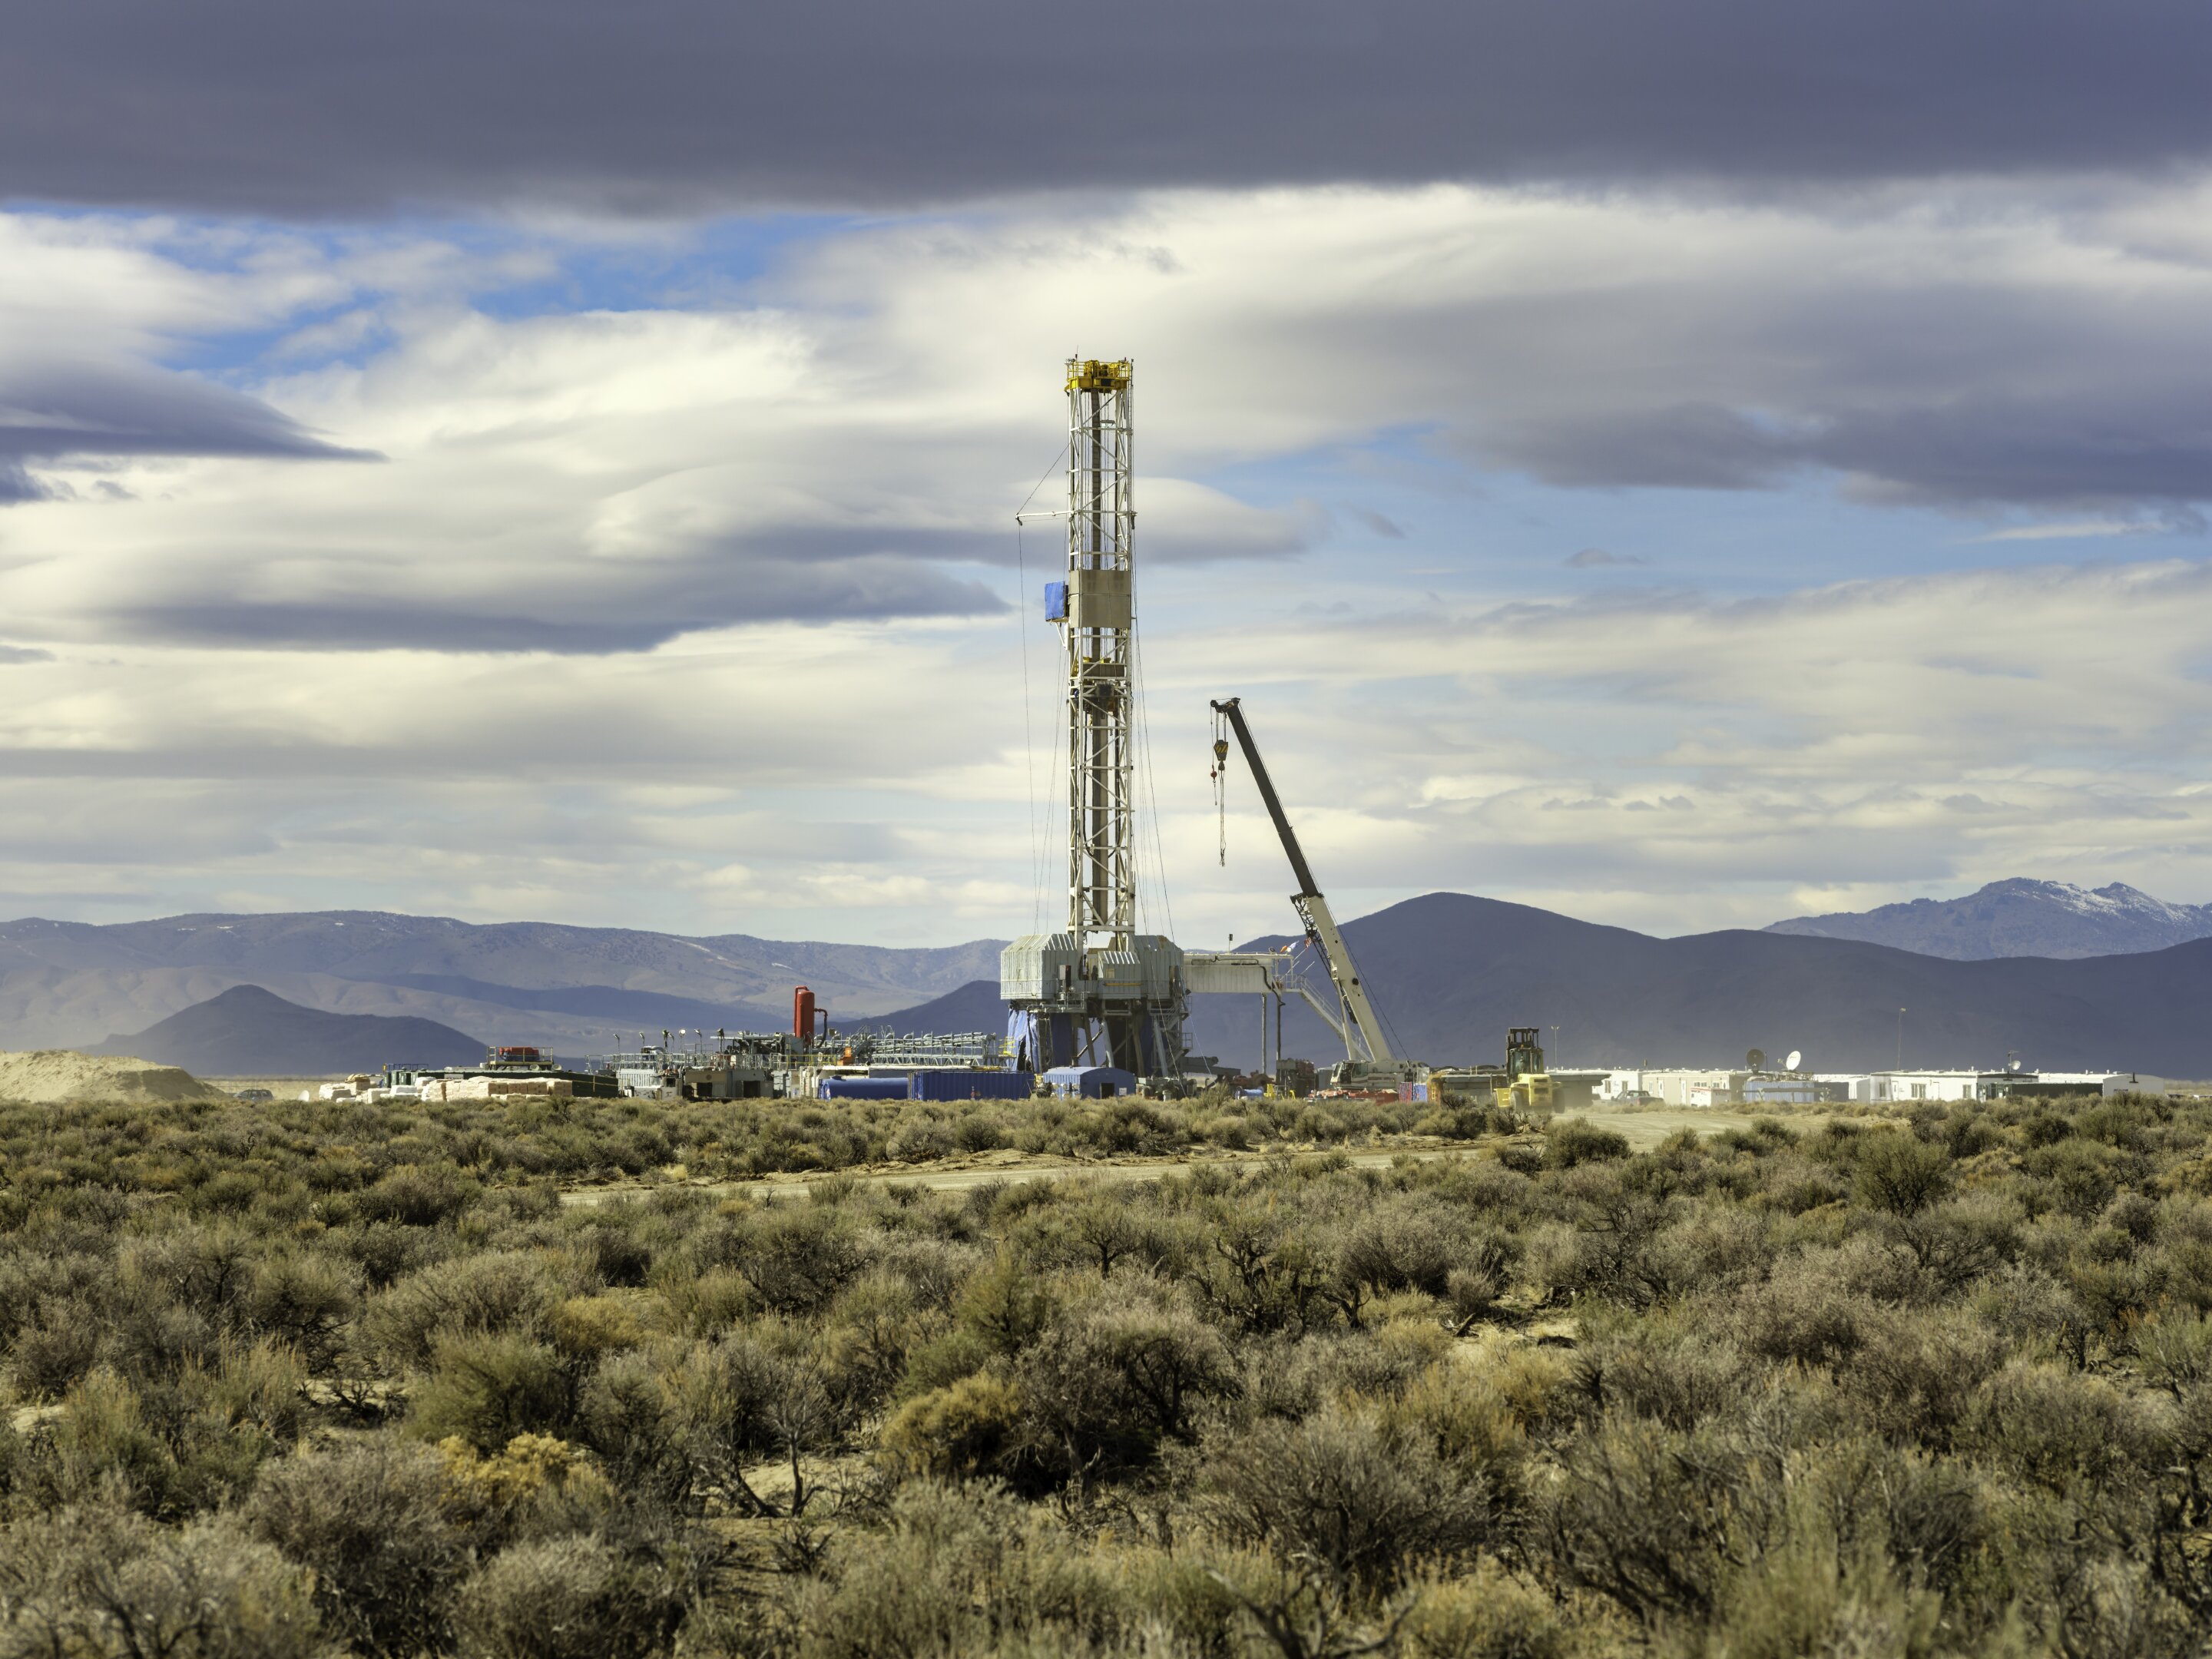 Study highlights the potential of geothermal power for decarbonizing electricity